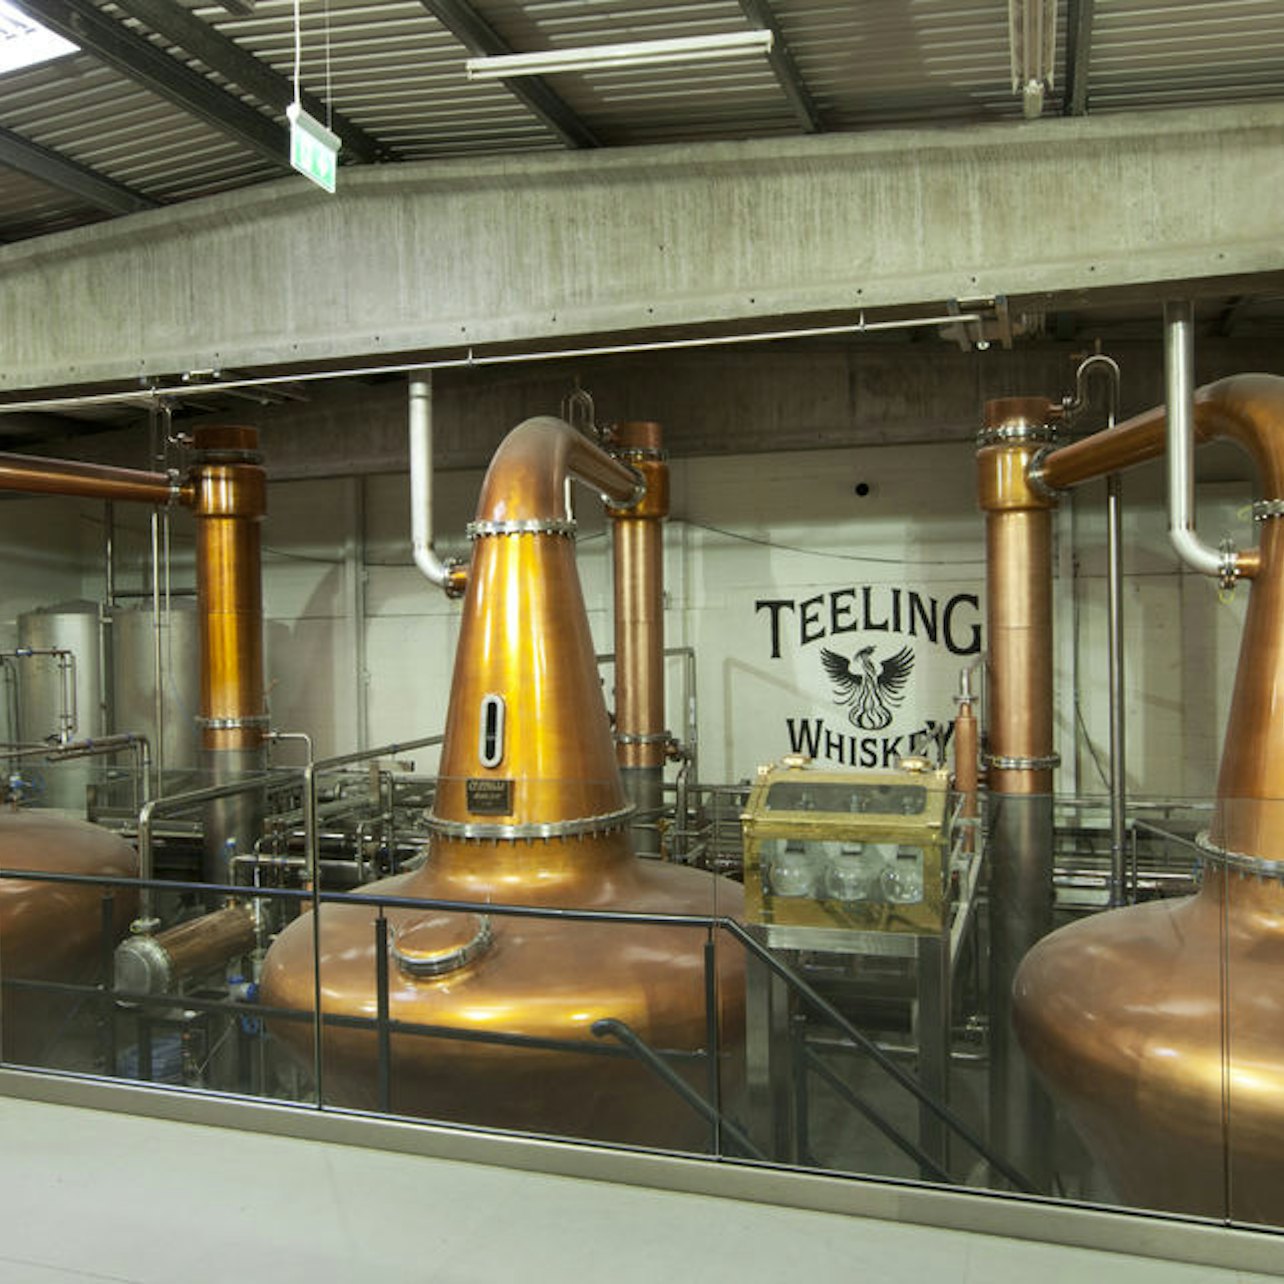 Teeling Whiskey Distillery: Tasting and Tour - Accommodations in Dublin